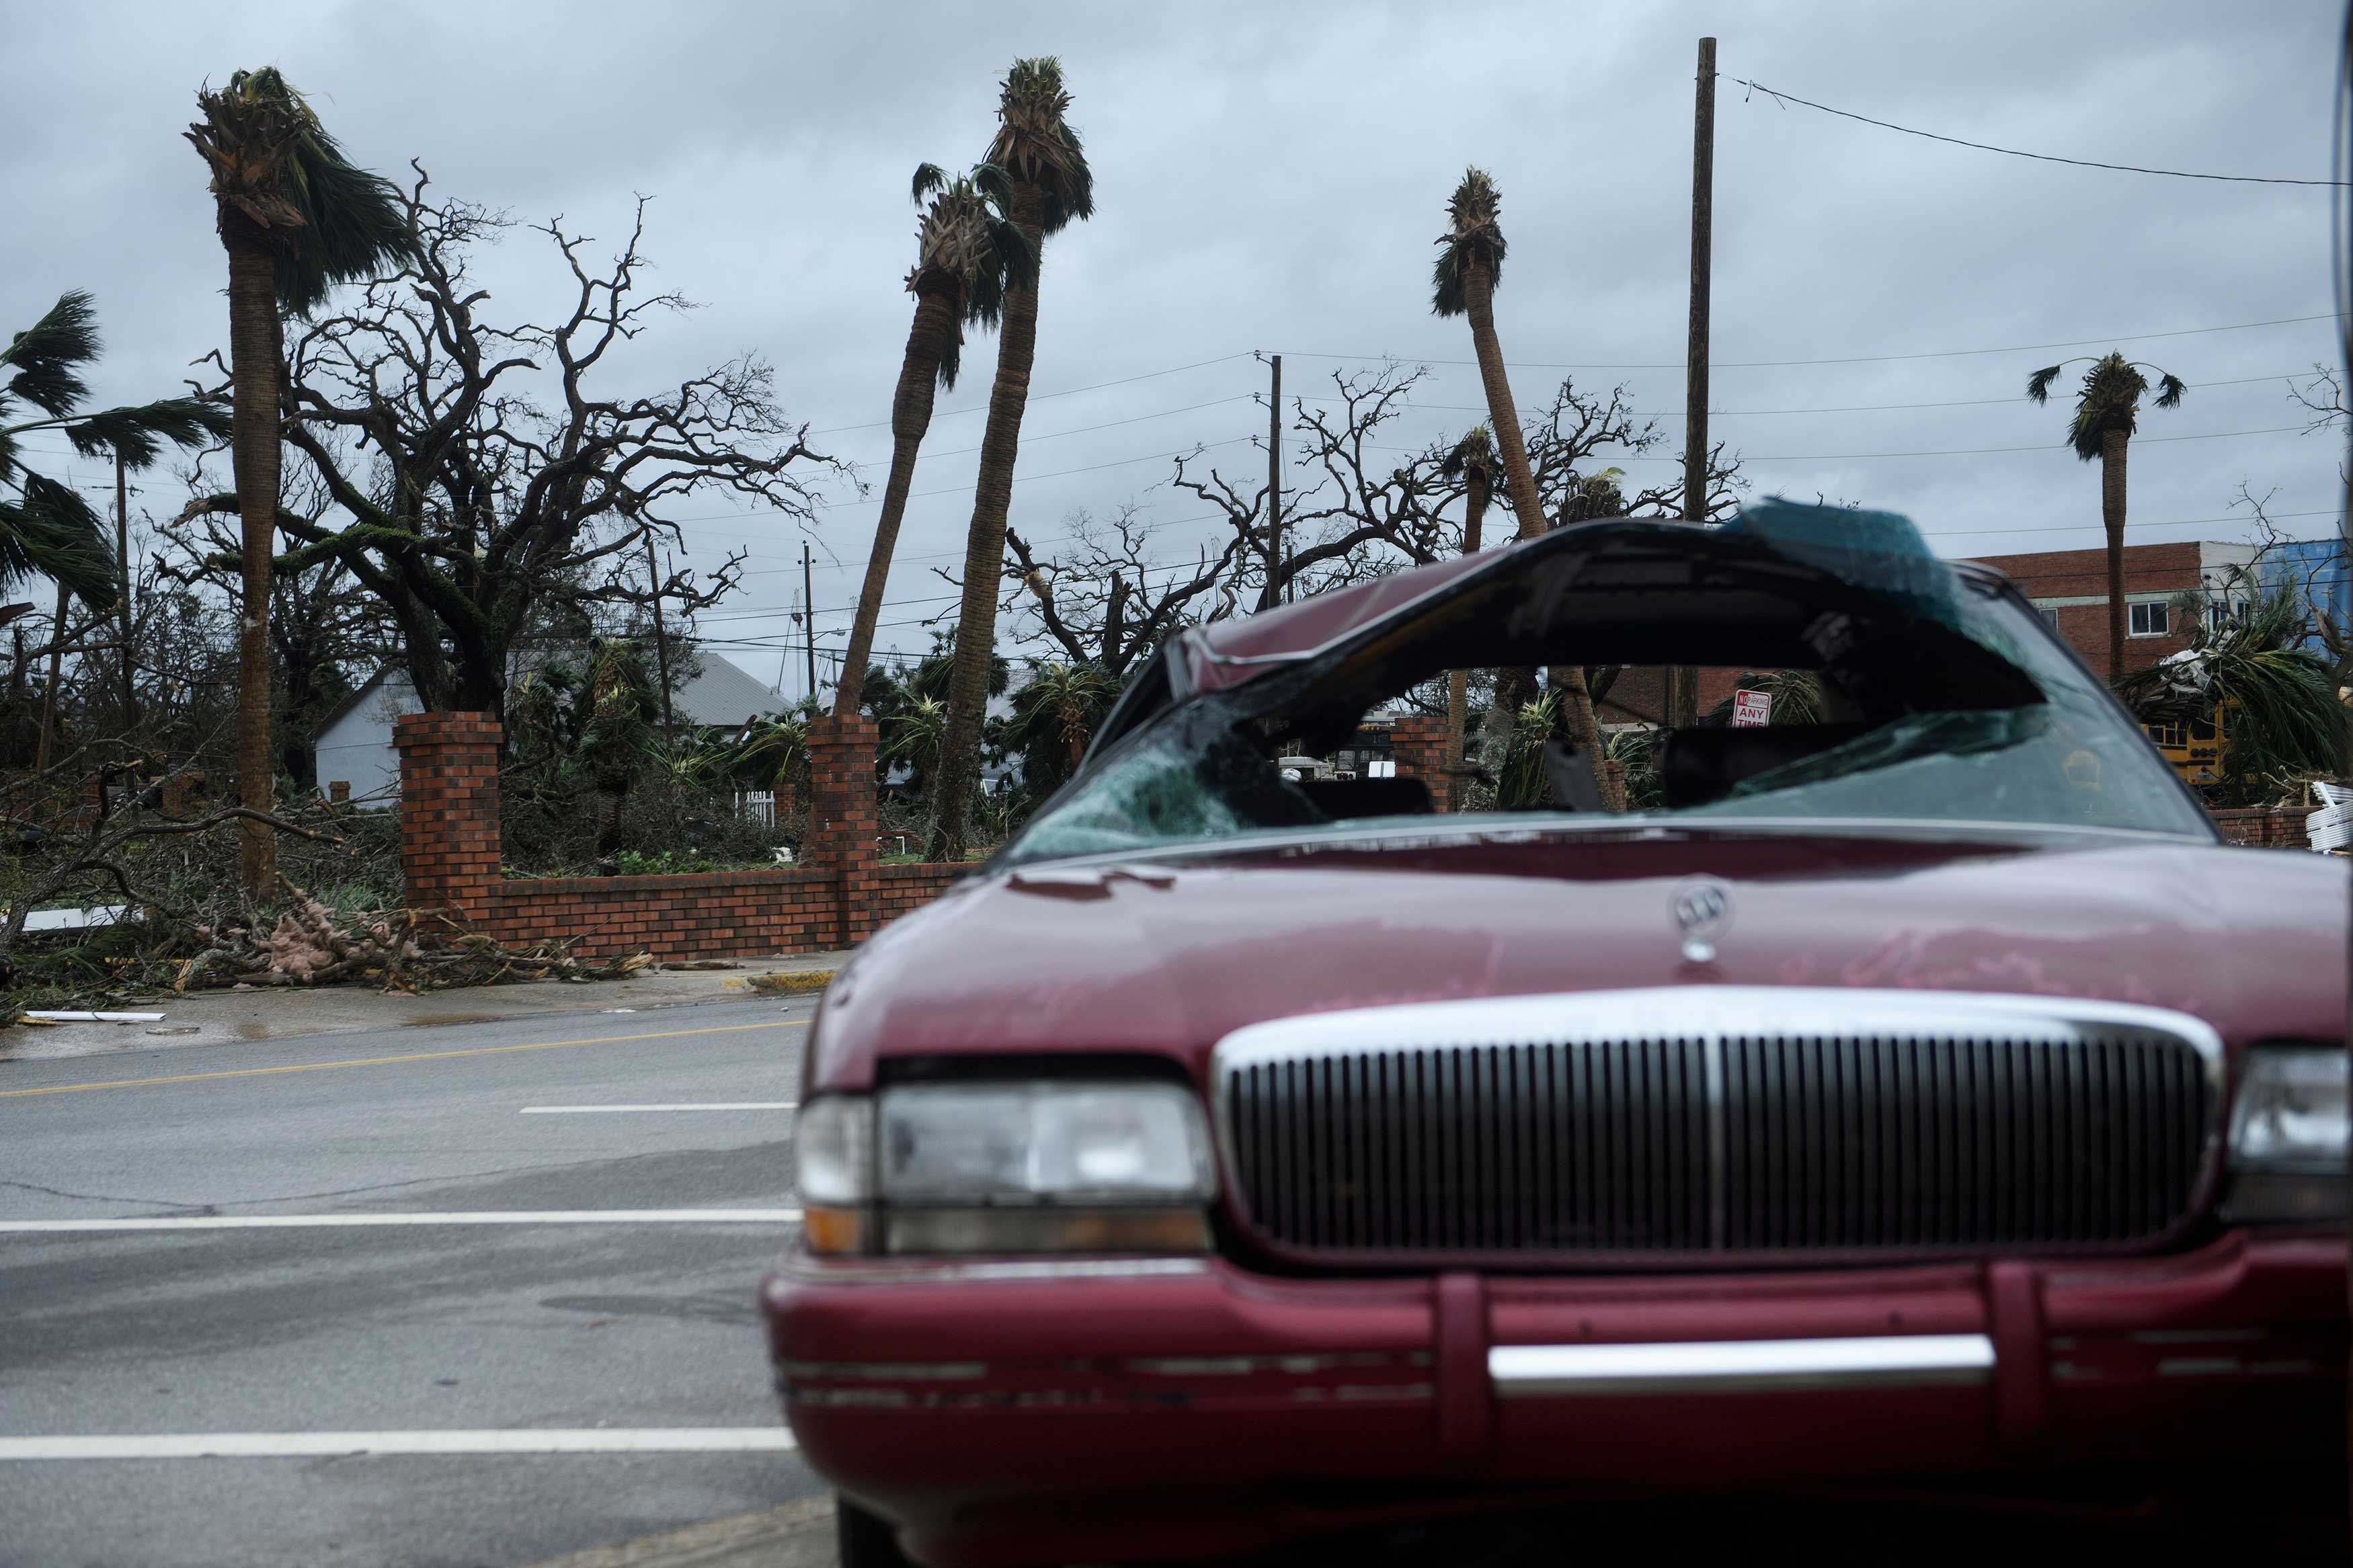 Storm damage is seen after Hurricane Michael Oct. 10, 2018 in Panama City, Fla. (Brendan Smialowski—AFP/Getty Images)